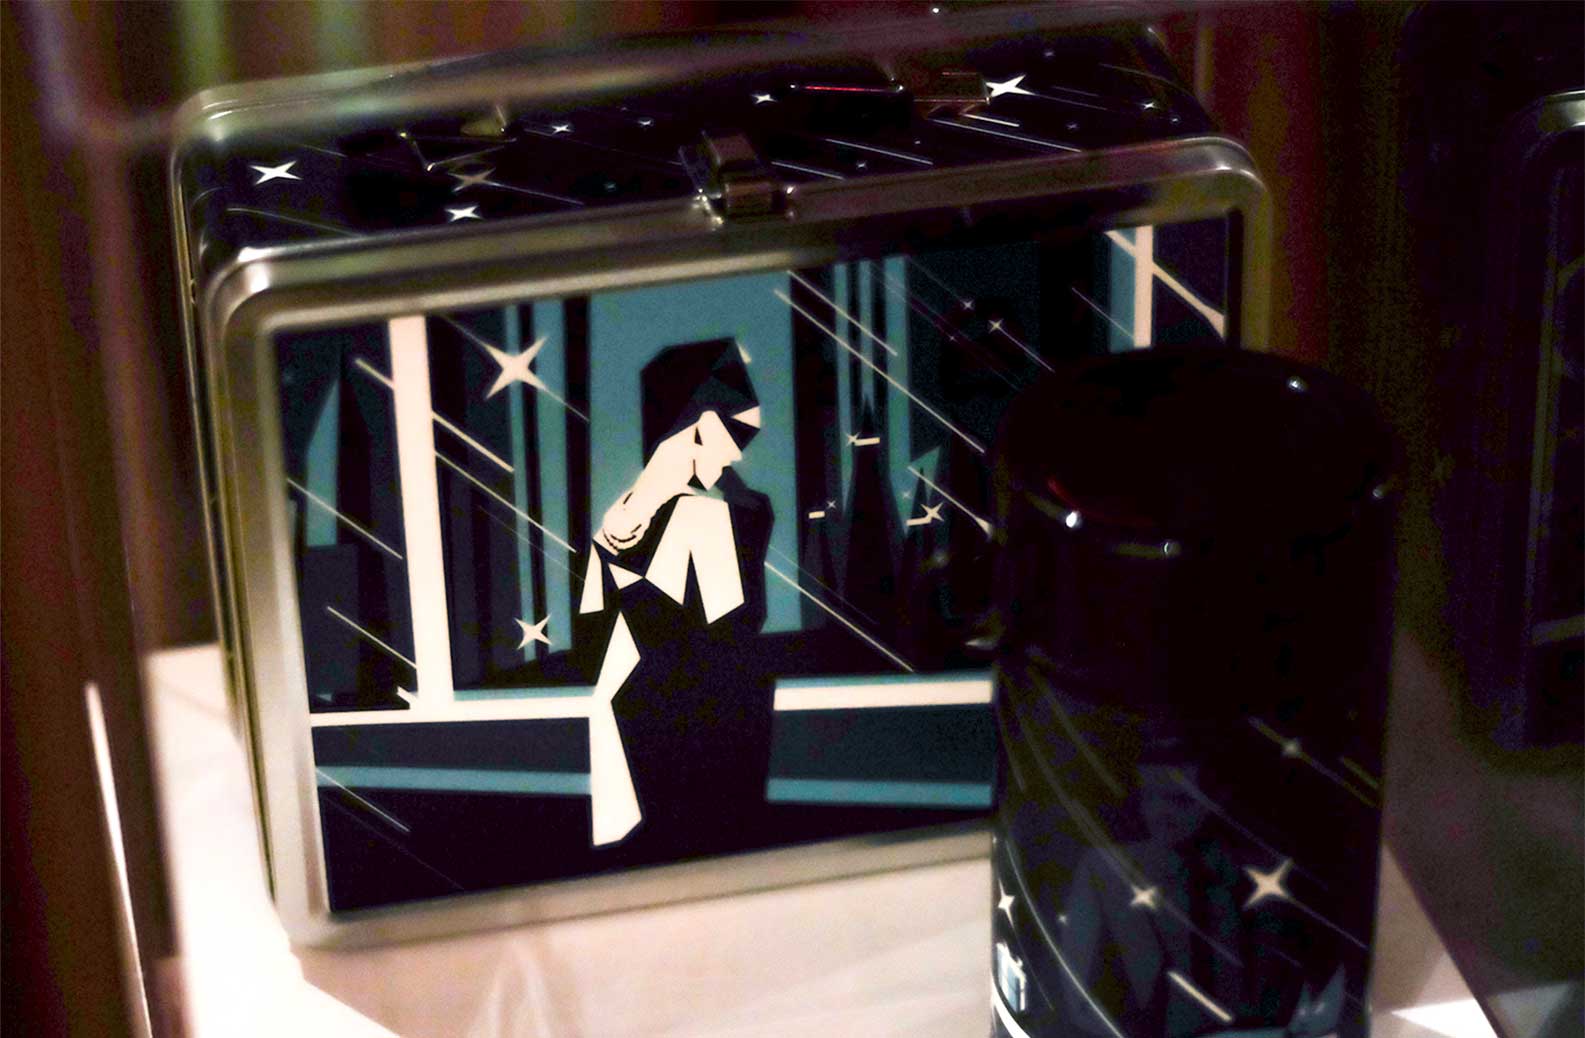 IRL - In Reel Life - Breakfast at Tiffanys Lunchbox Art Installation by Jacober Creative